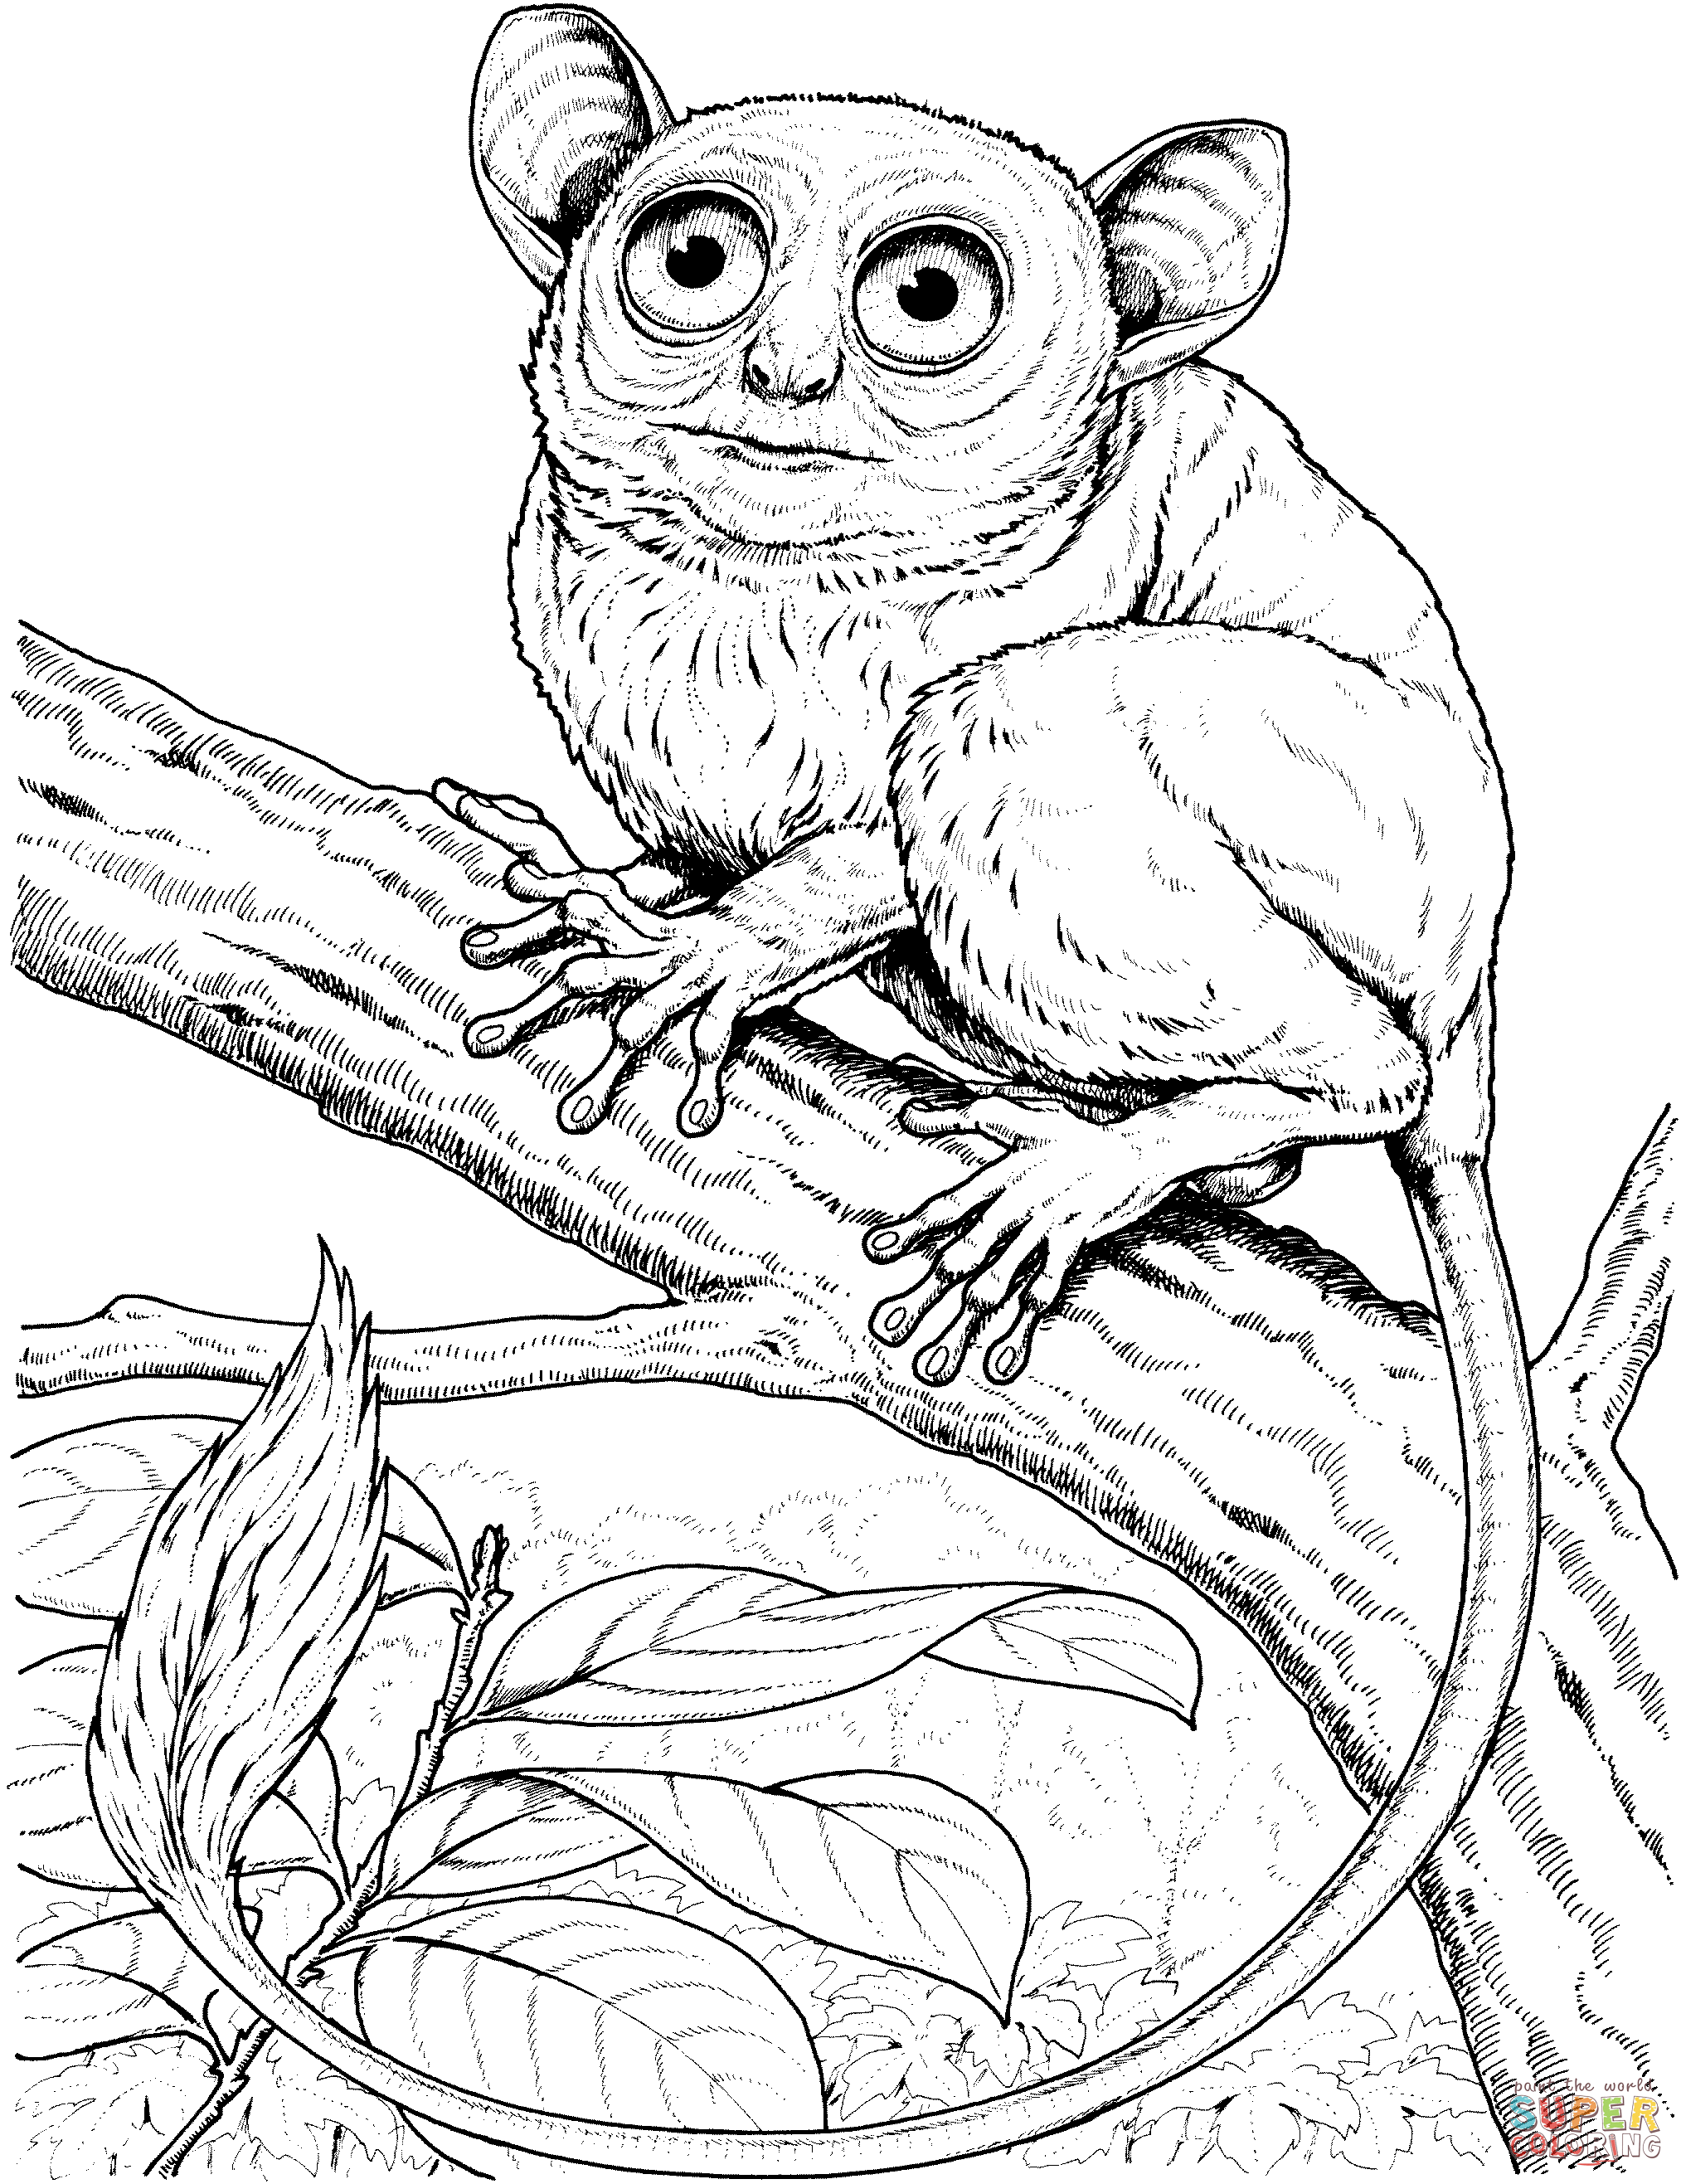 Tarsier coloring pages | Free Coloring Pages